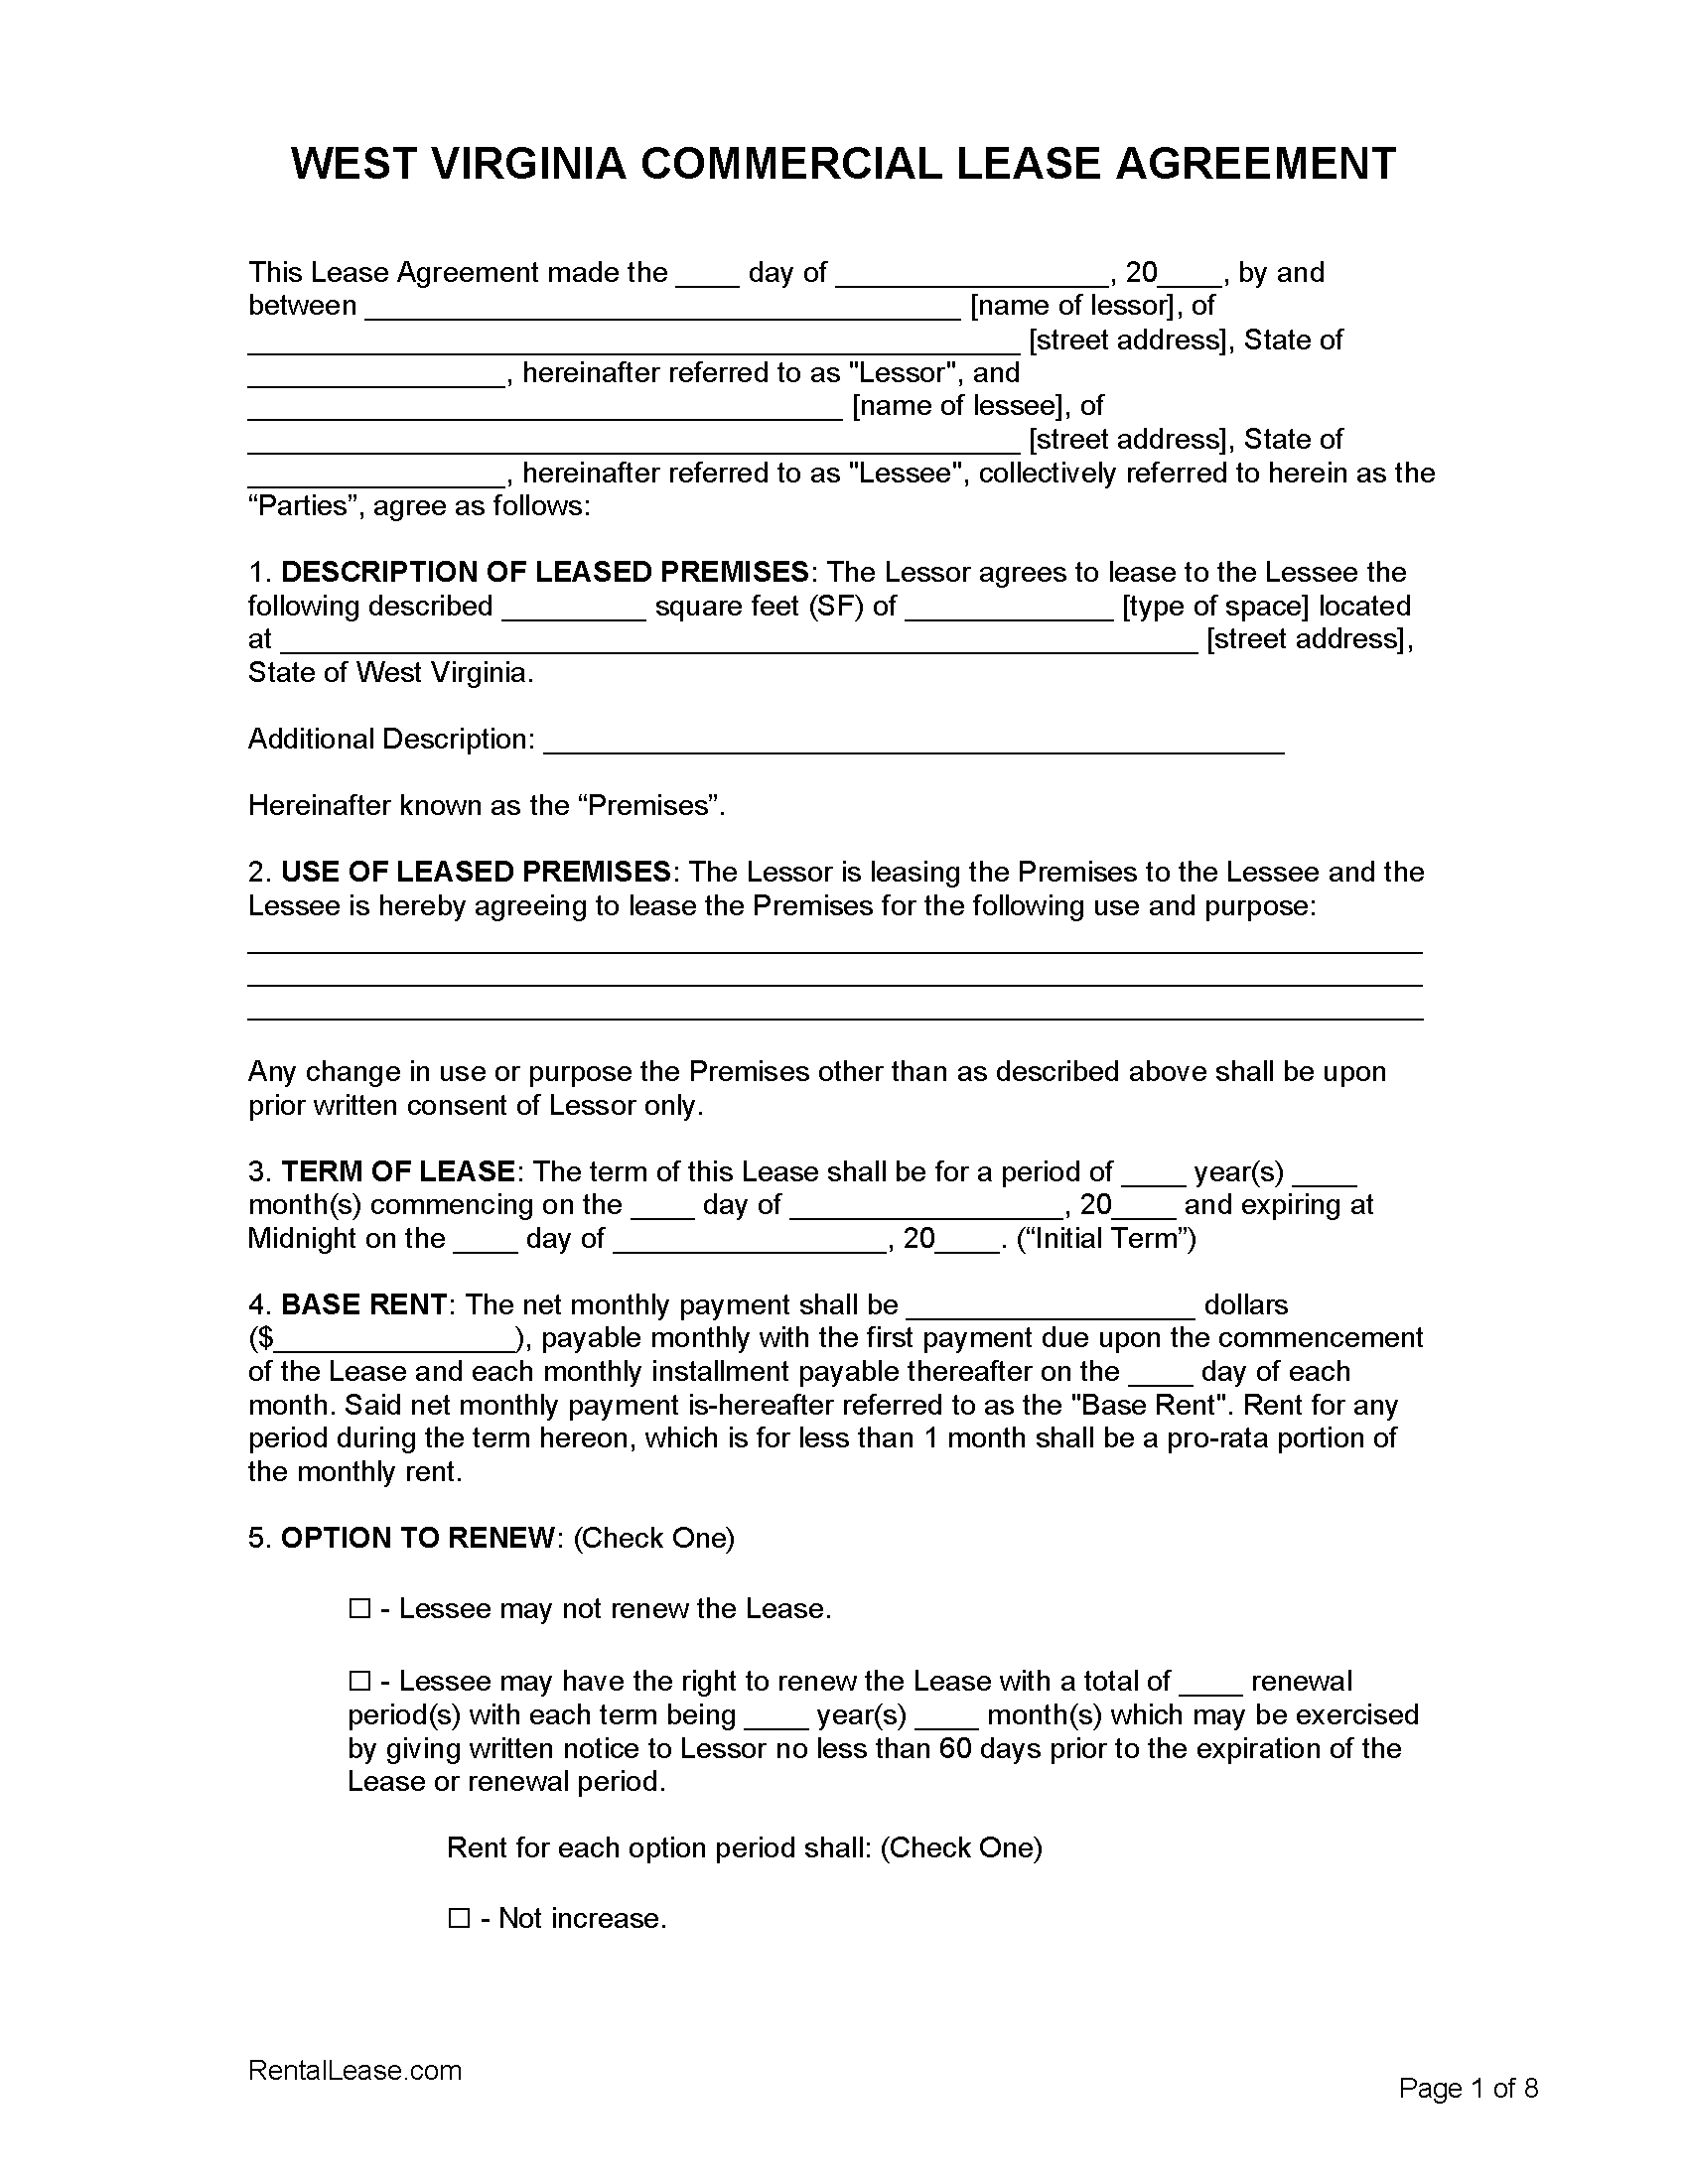 free-west-virginia-commercial-lease-agreement-template-pdf-word